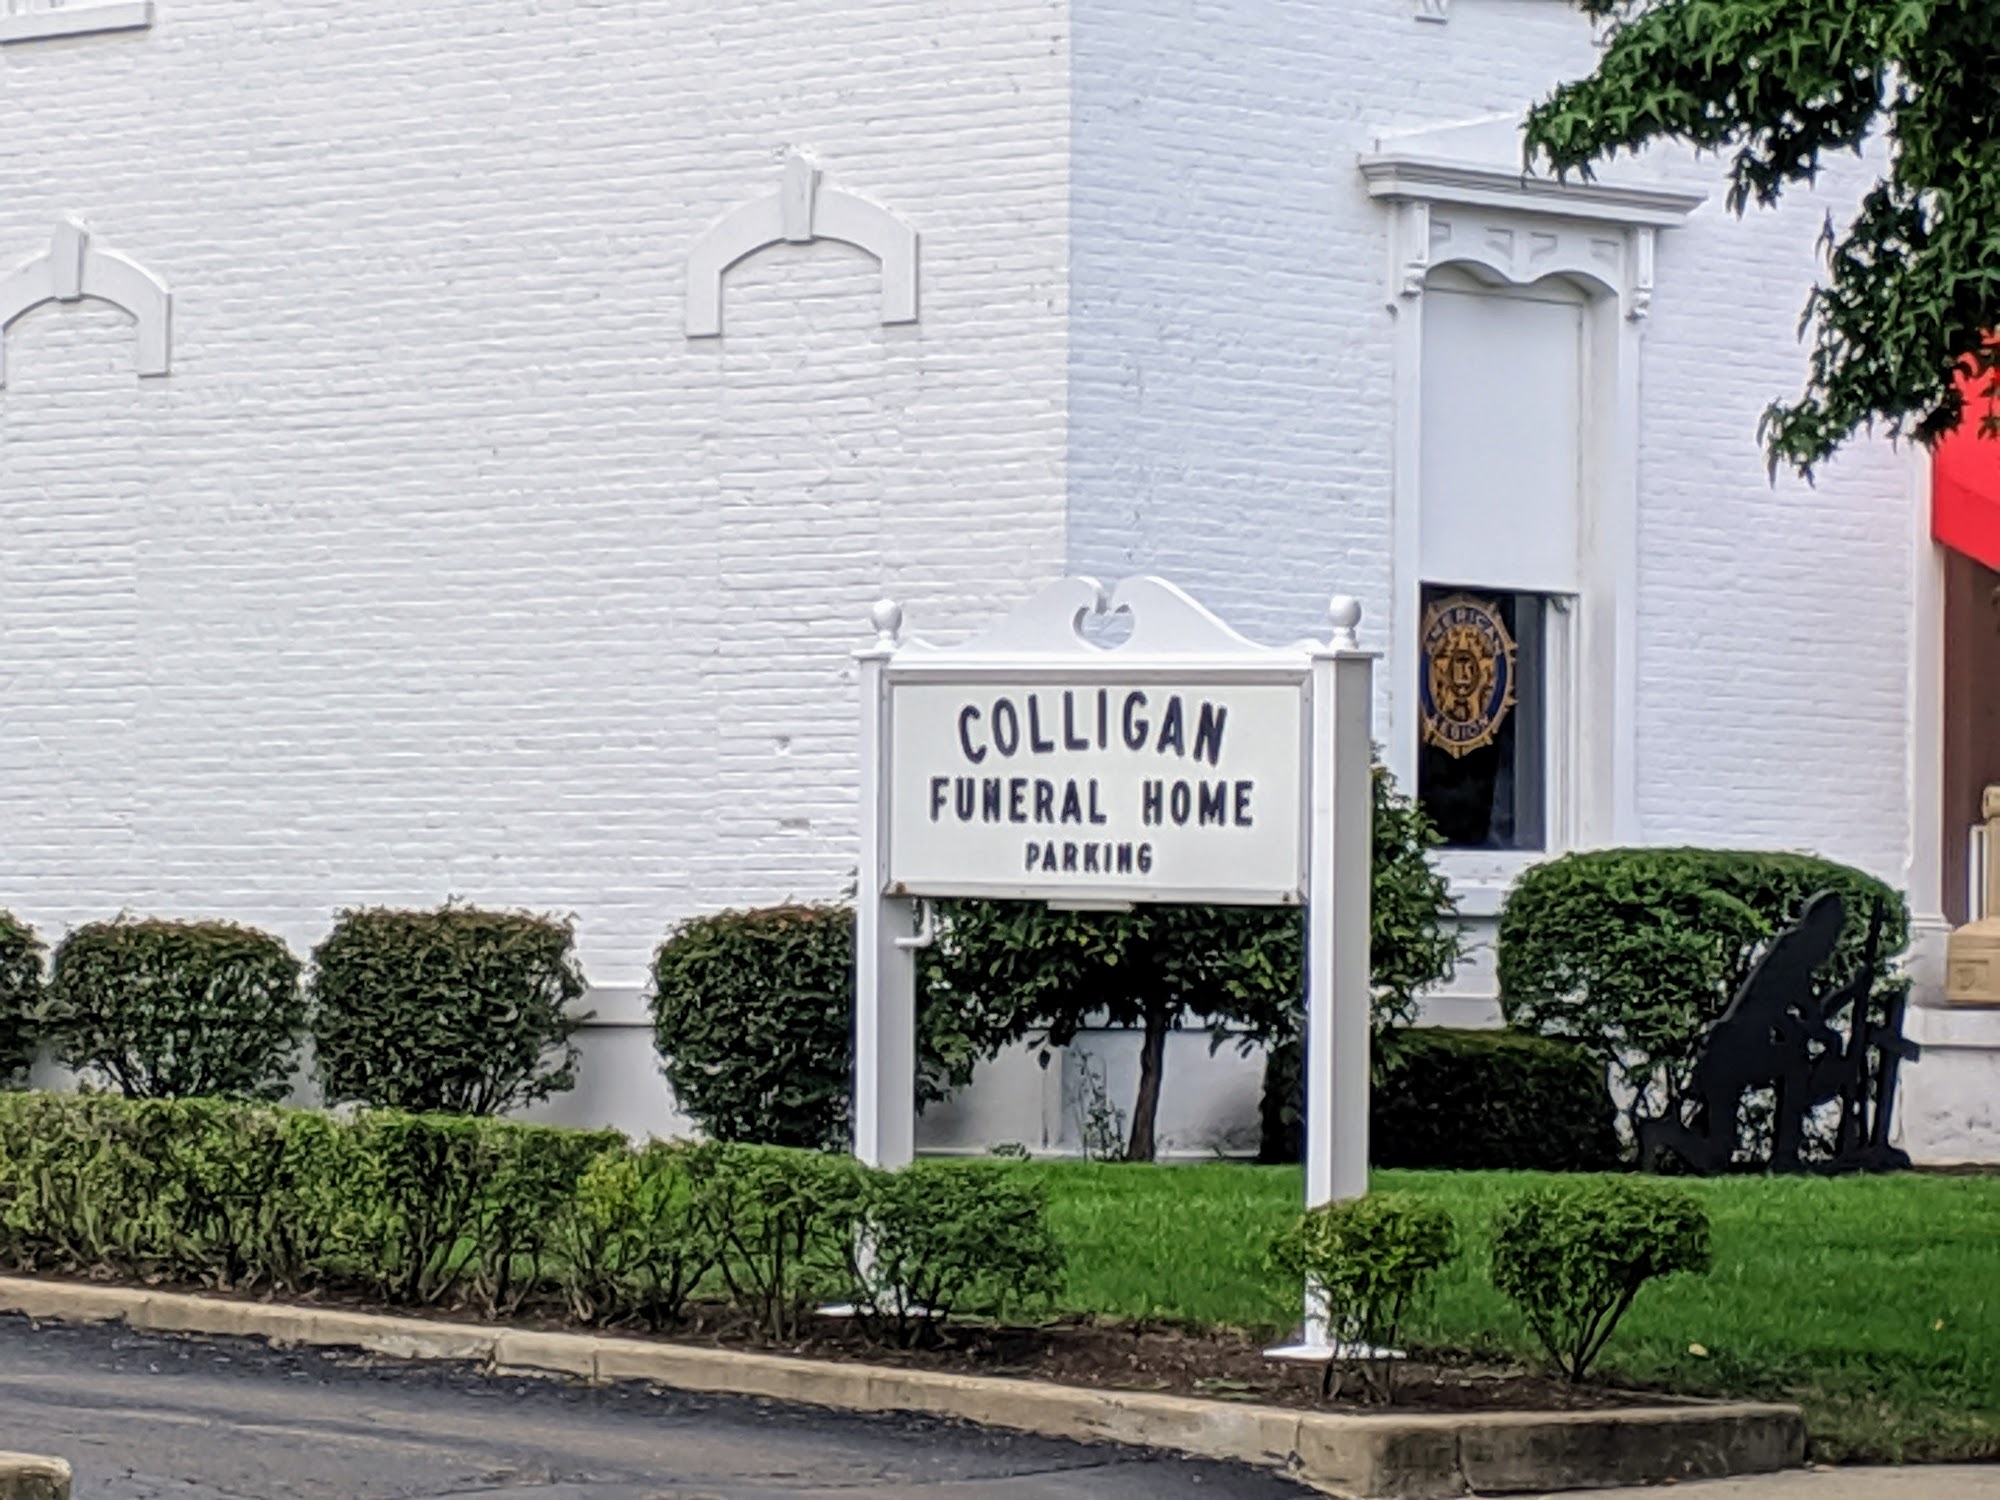 Colligan Funeral Home